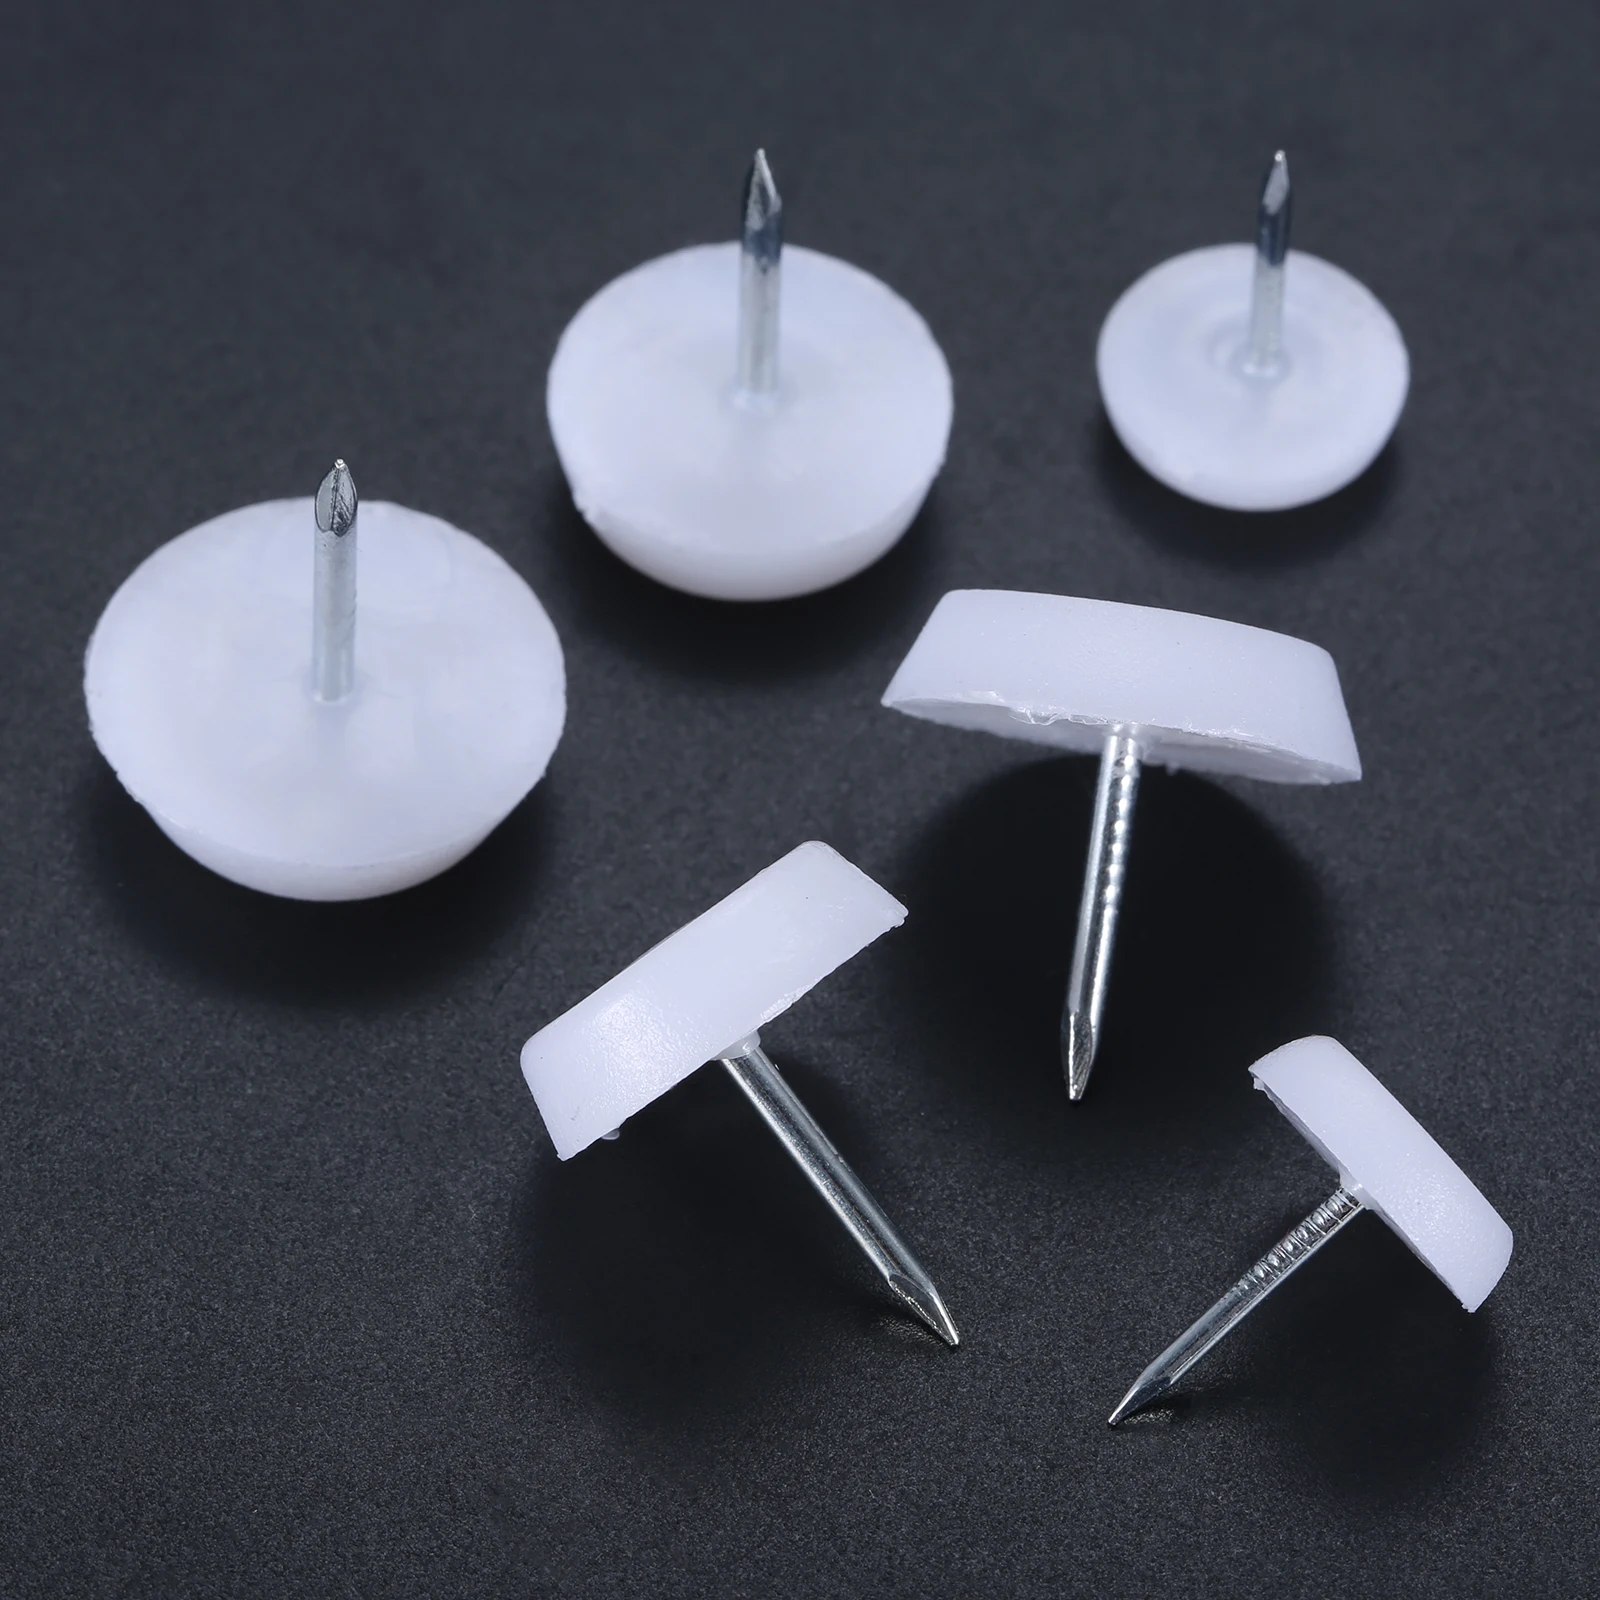 50pcs Furniture Feet Nails Stick-on Glide Skid Pad Screw-in 14/18/20mm Lat-Bottom Round Chair Table Leg Protector White Plastic